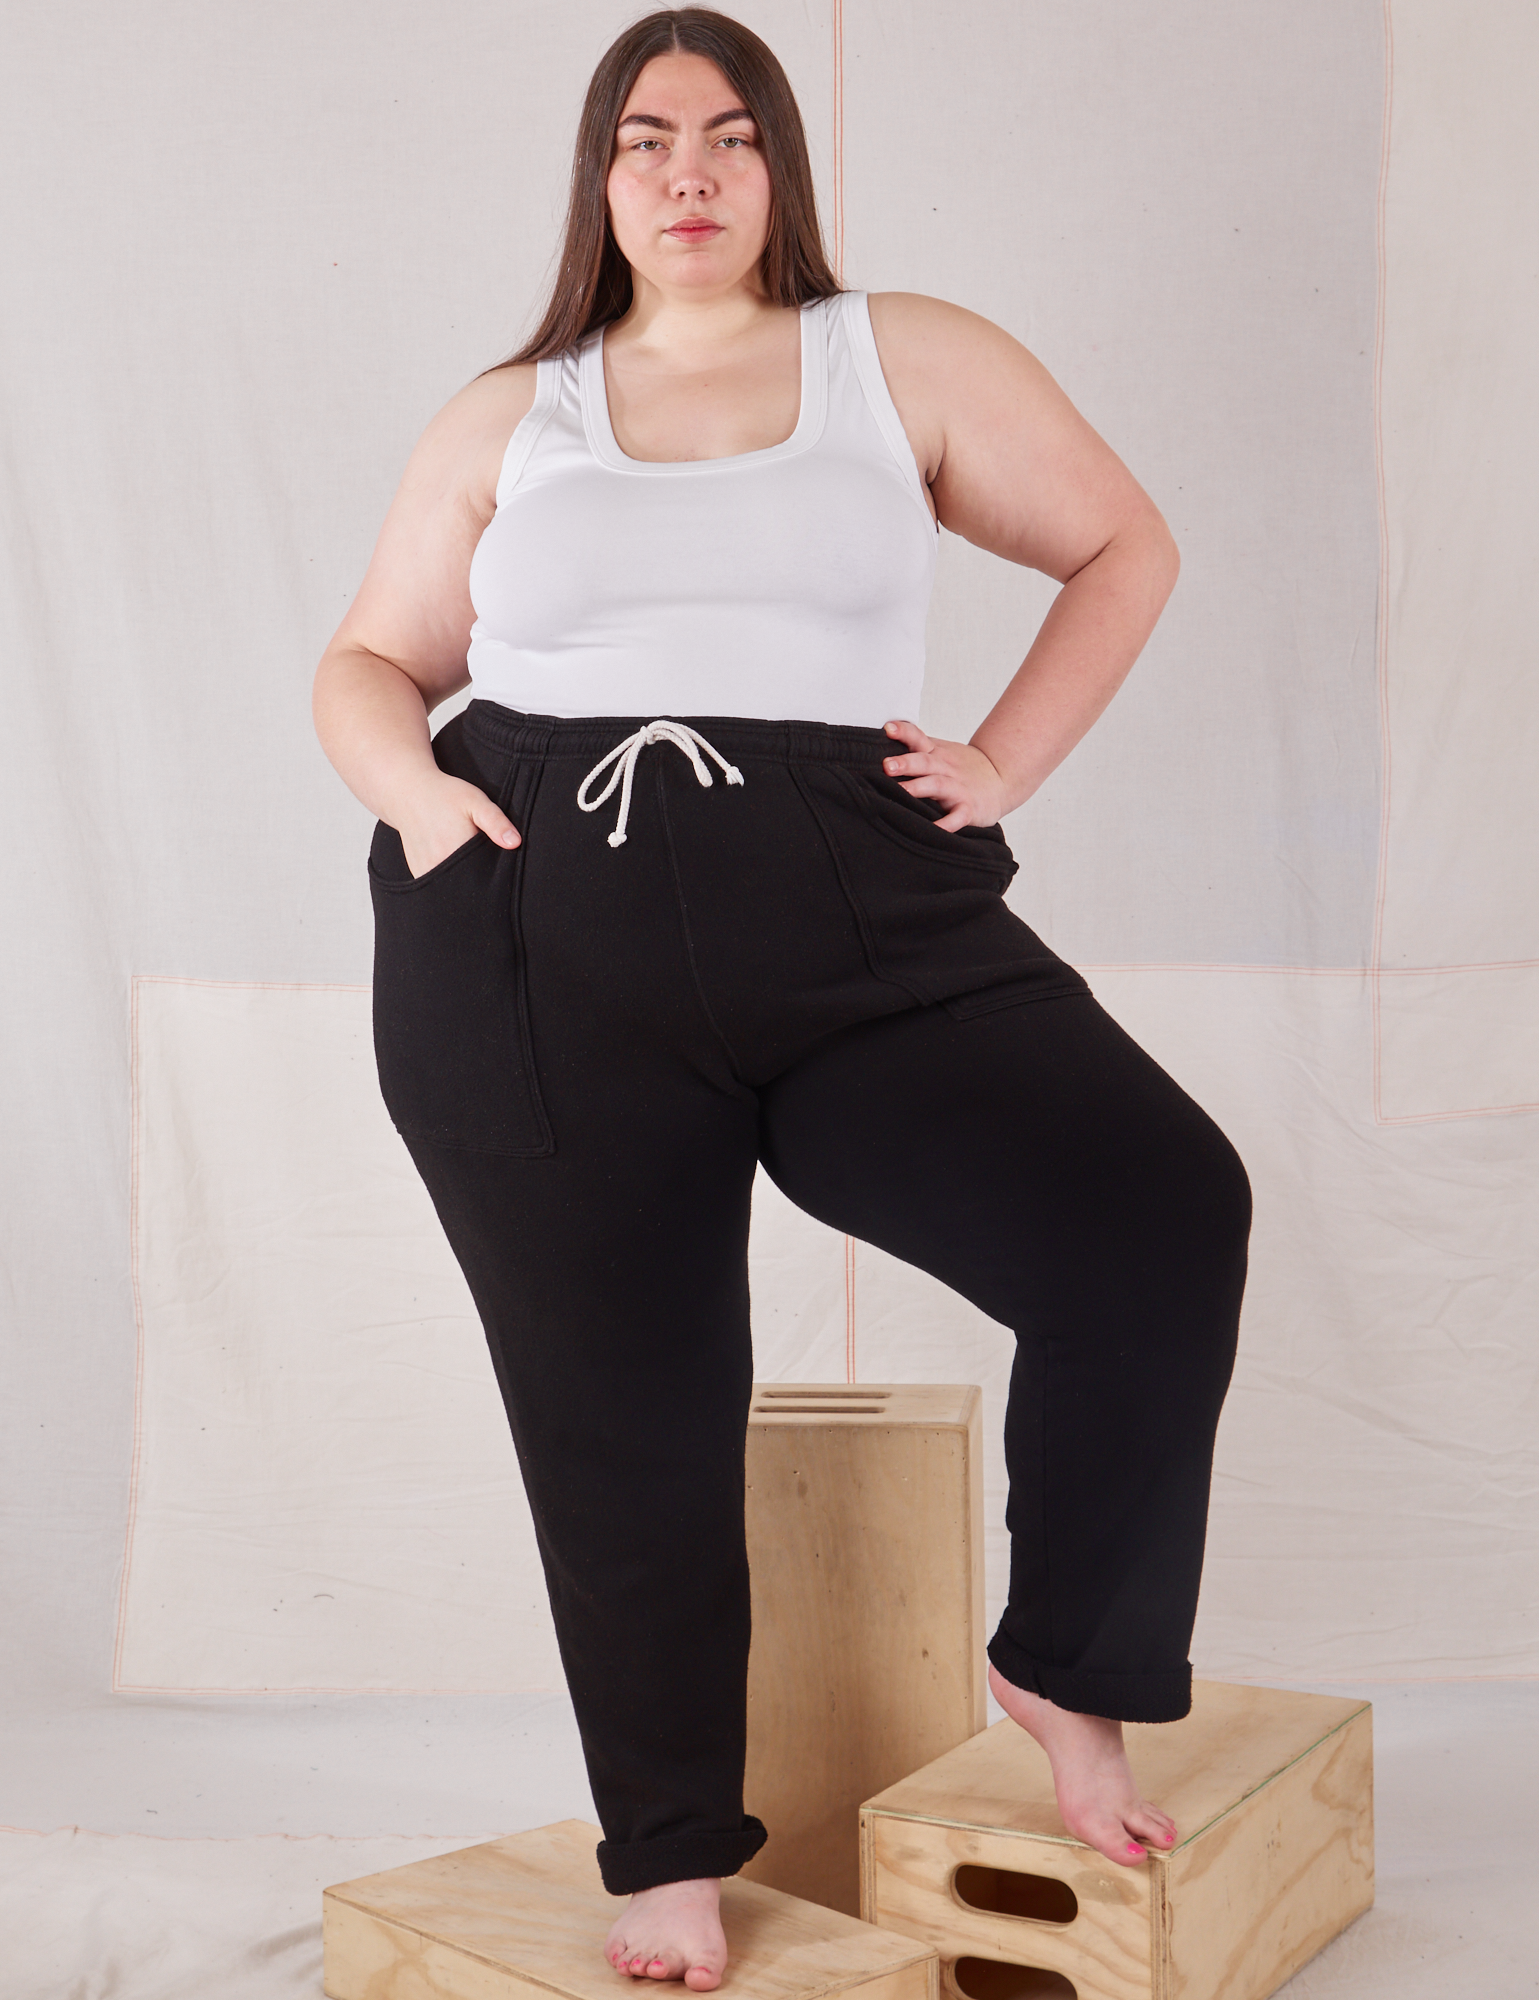 Marielena is 5&#39;8&quot; and wearing 1XL Rolled Cuff Sweat Pants in Basic Black paired with vintage off-white Cropped Tank